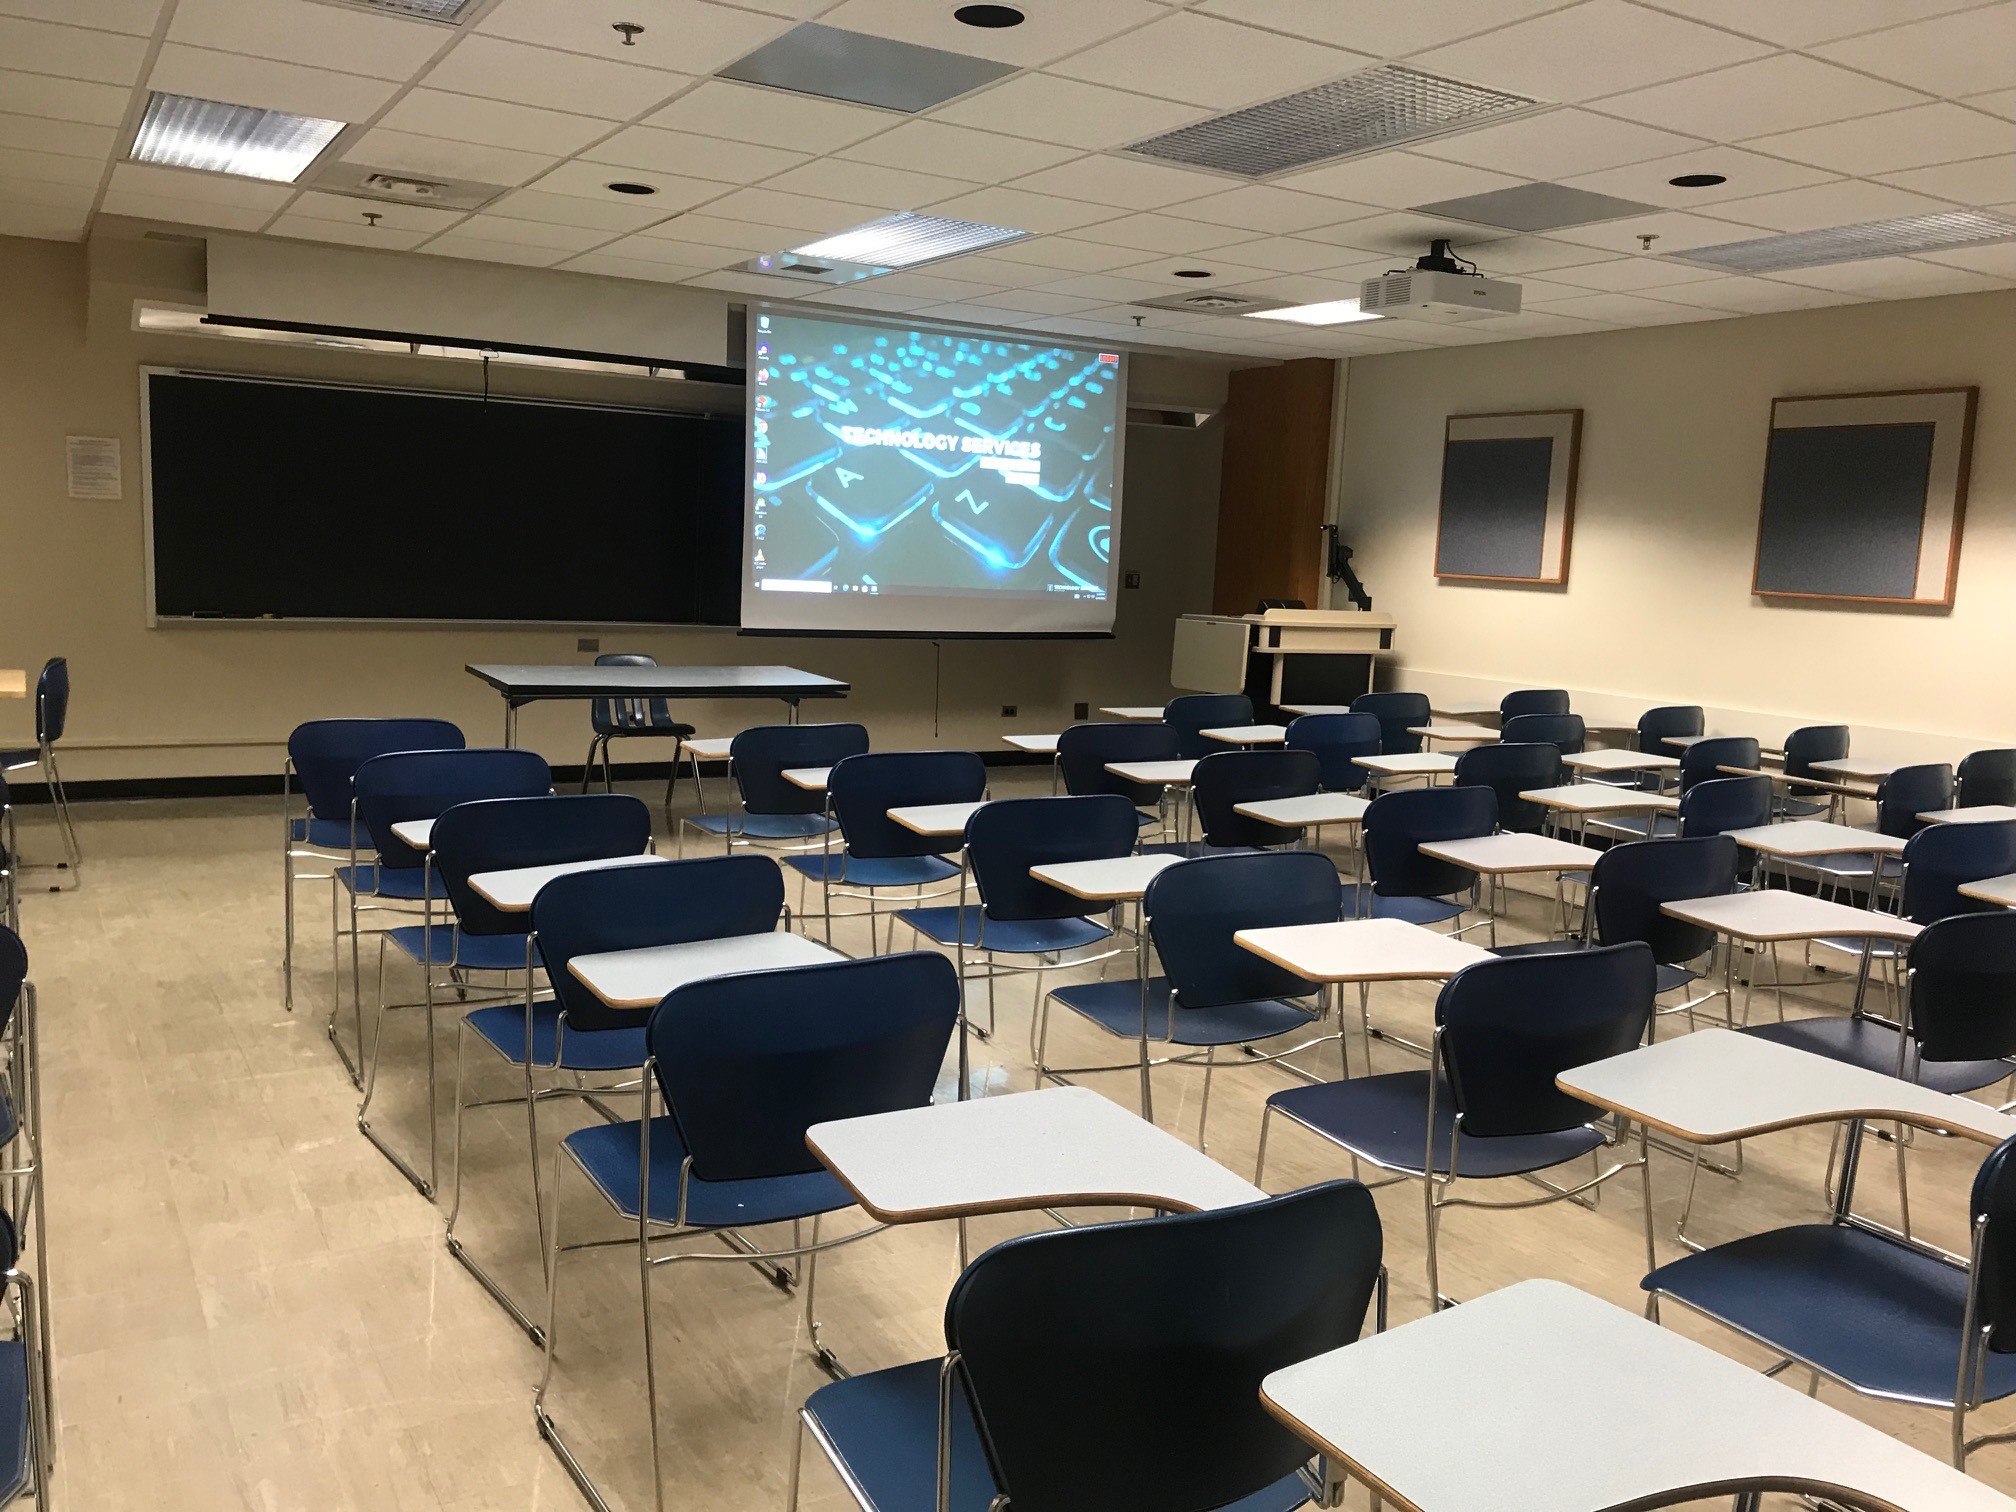 A view of the classroom with movable tableted arm chairs, chalkboard, instructor lectern, and instructor table in front.